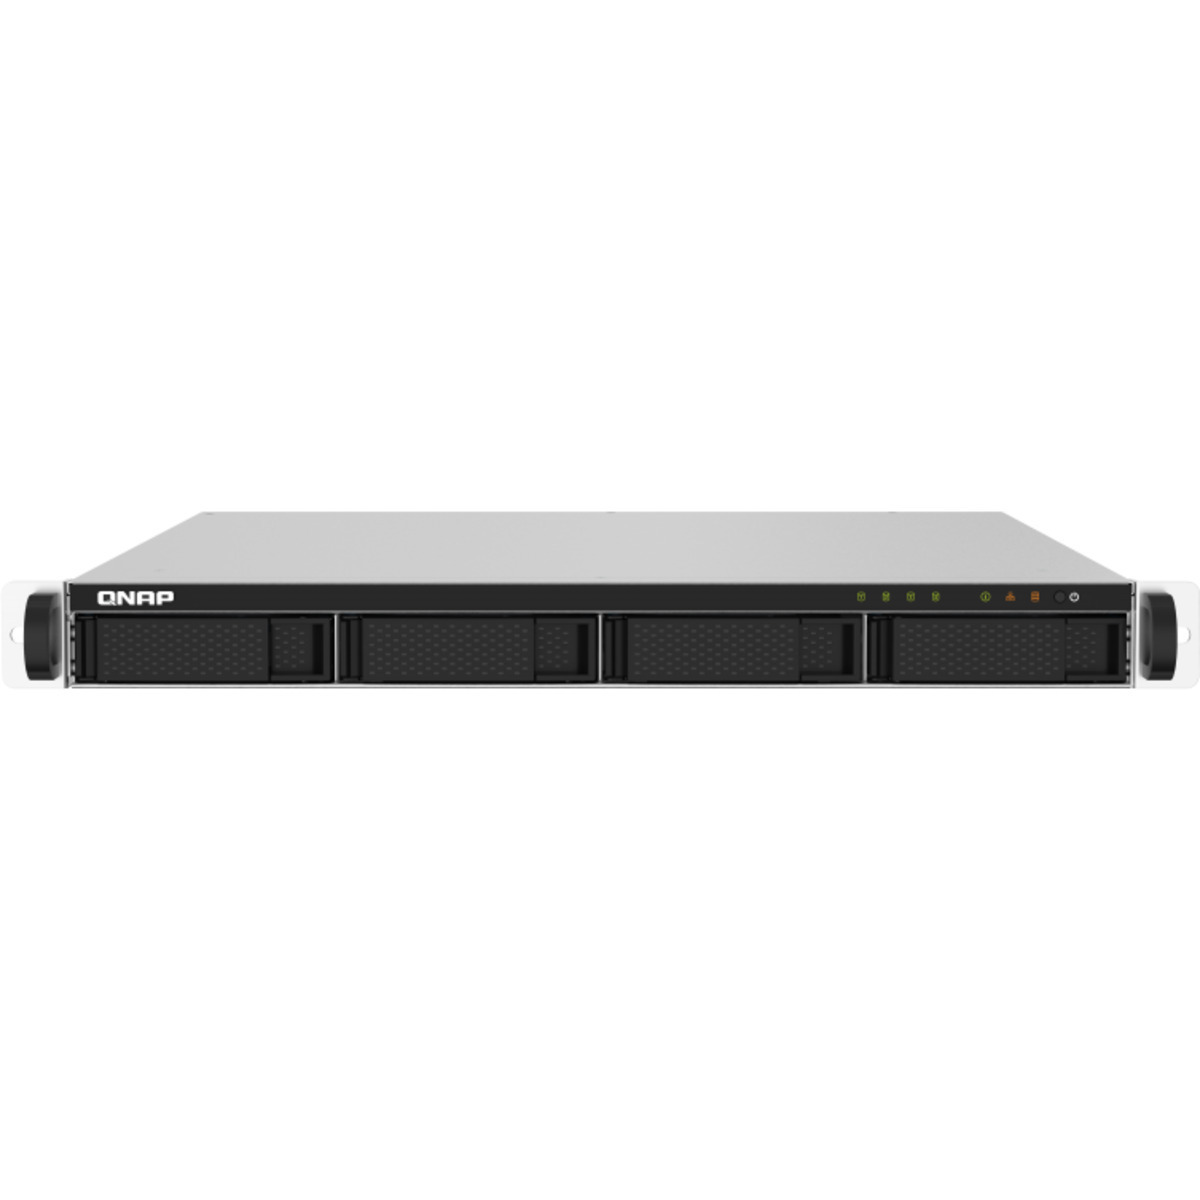 QNAP TS-432PXU 28tb 4-Bay RackMount Personal / Basic Home / Small Office NAS - Network Attached Storage Device 2x14tb Seagate IronWolf Pro ST14000NT001 3.5 7200rpm SATA 6Gb/s HDD NAS Class Drives Installed - Burn-In Tested - FREE RAM UPGRADE TS-432PXU